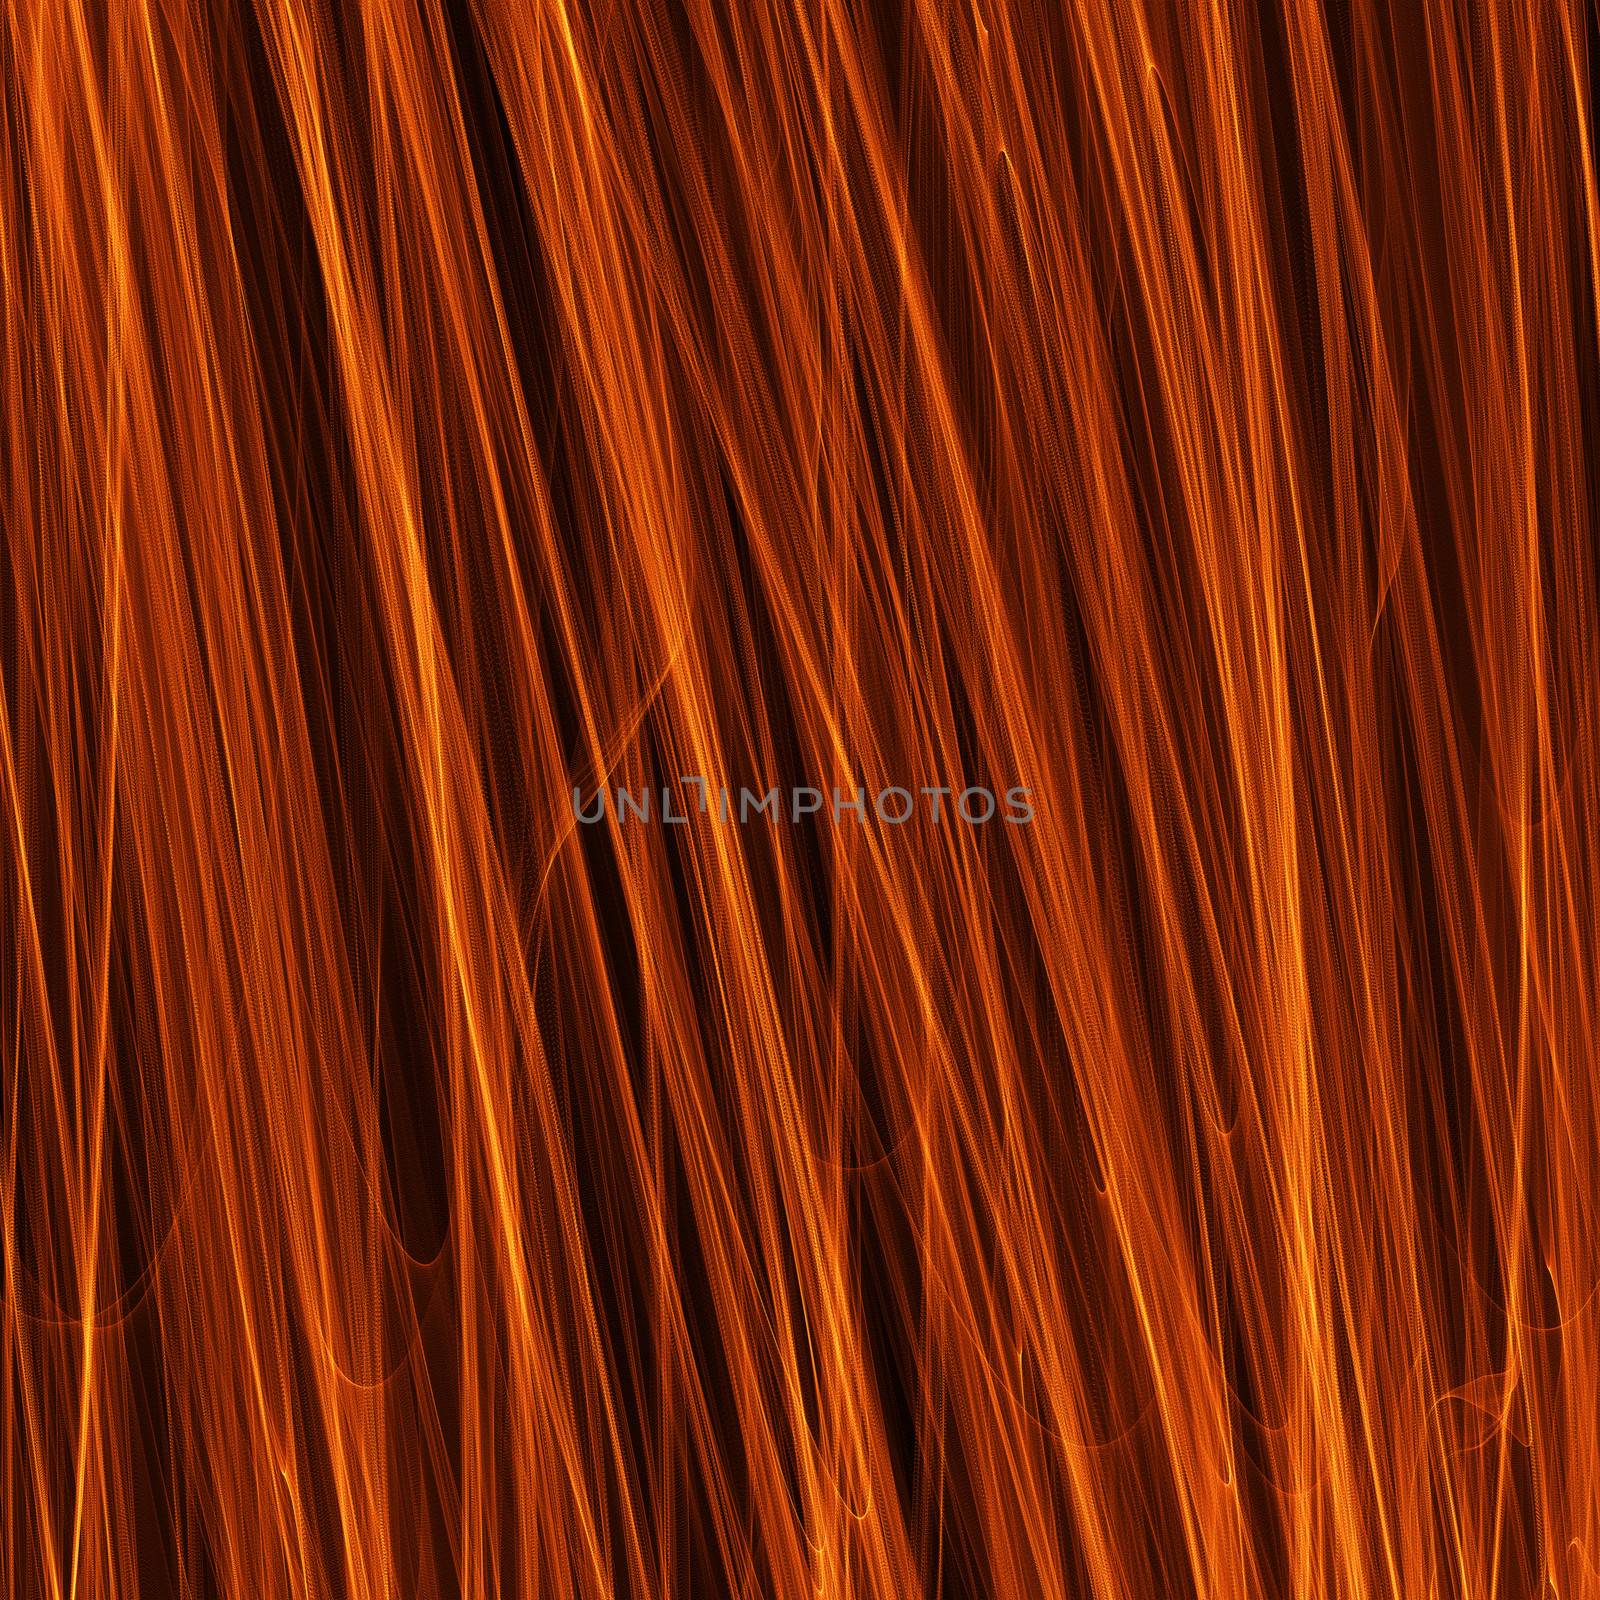 Flame Abstract Background for various design artworks